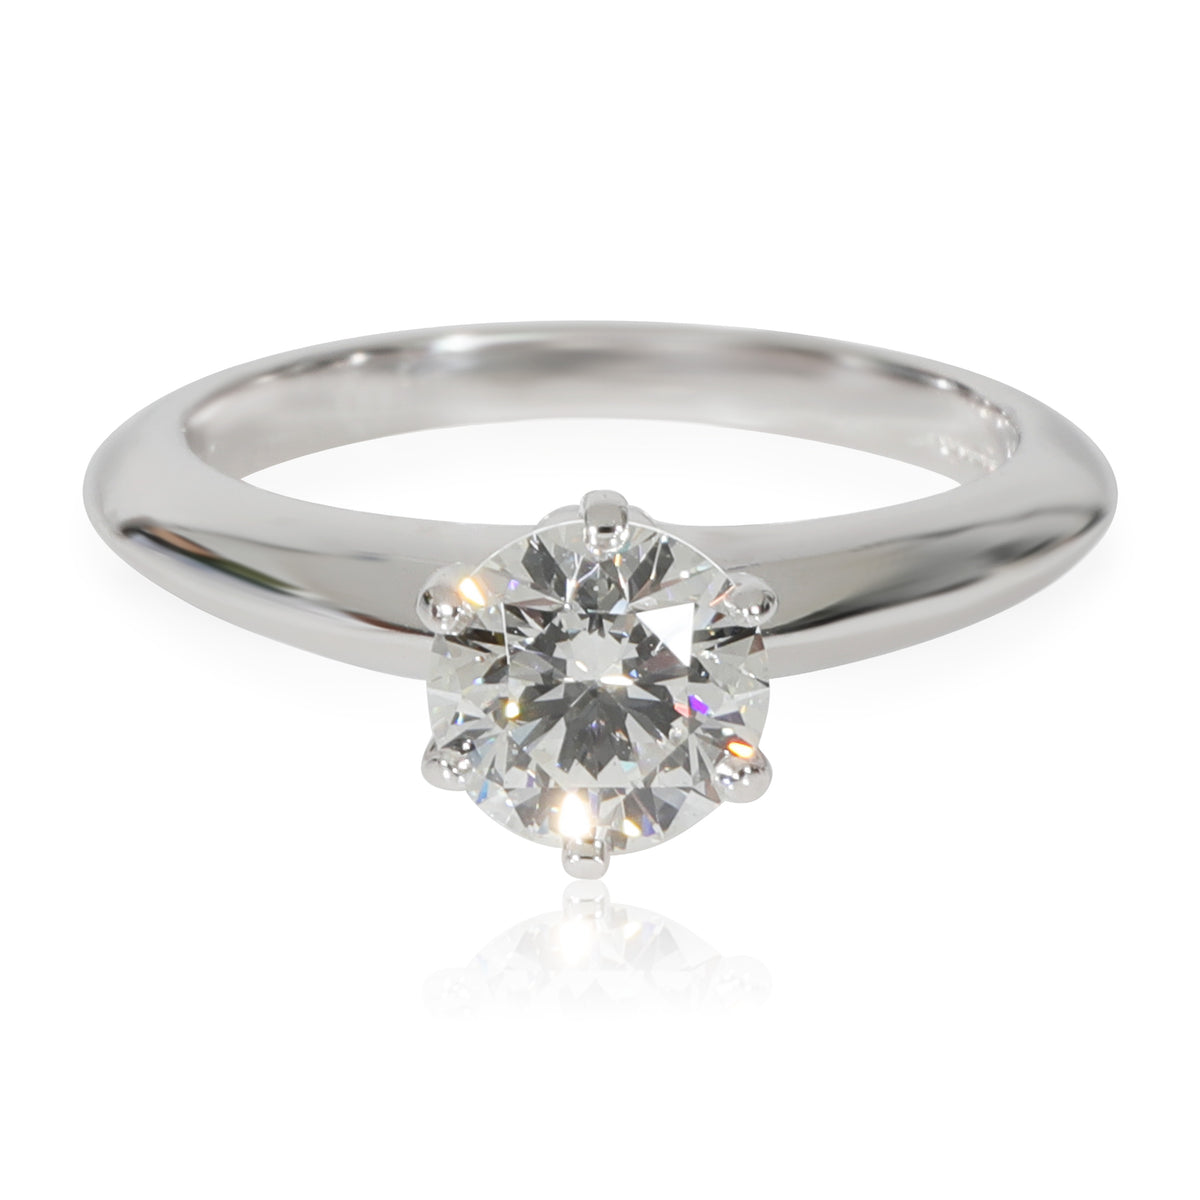 Tiffany & Co. Diamond Solitaire Engagement Ring in Platinum G VS1 0.94 CTW